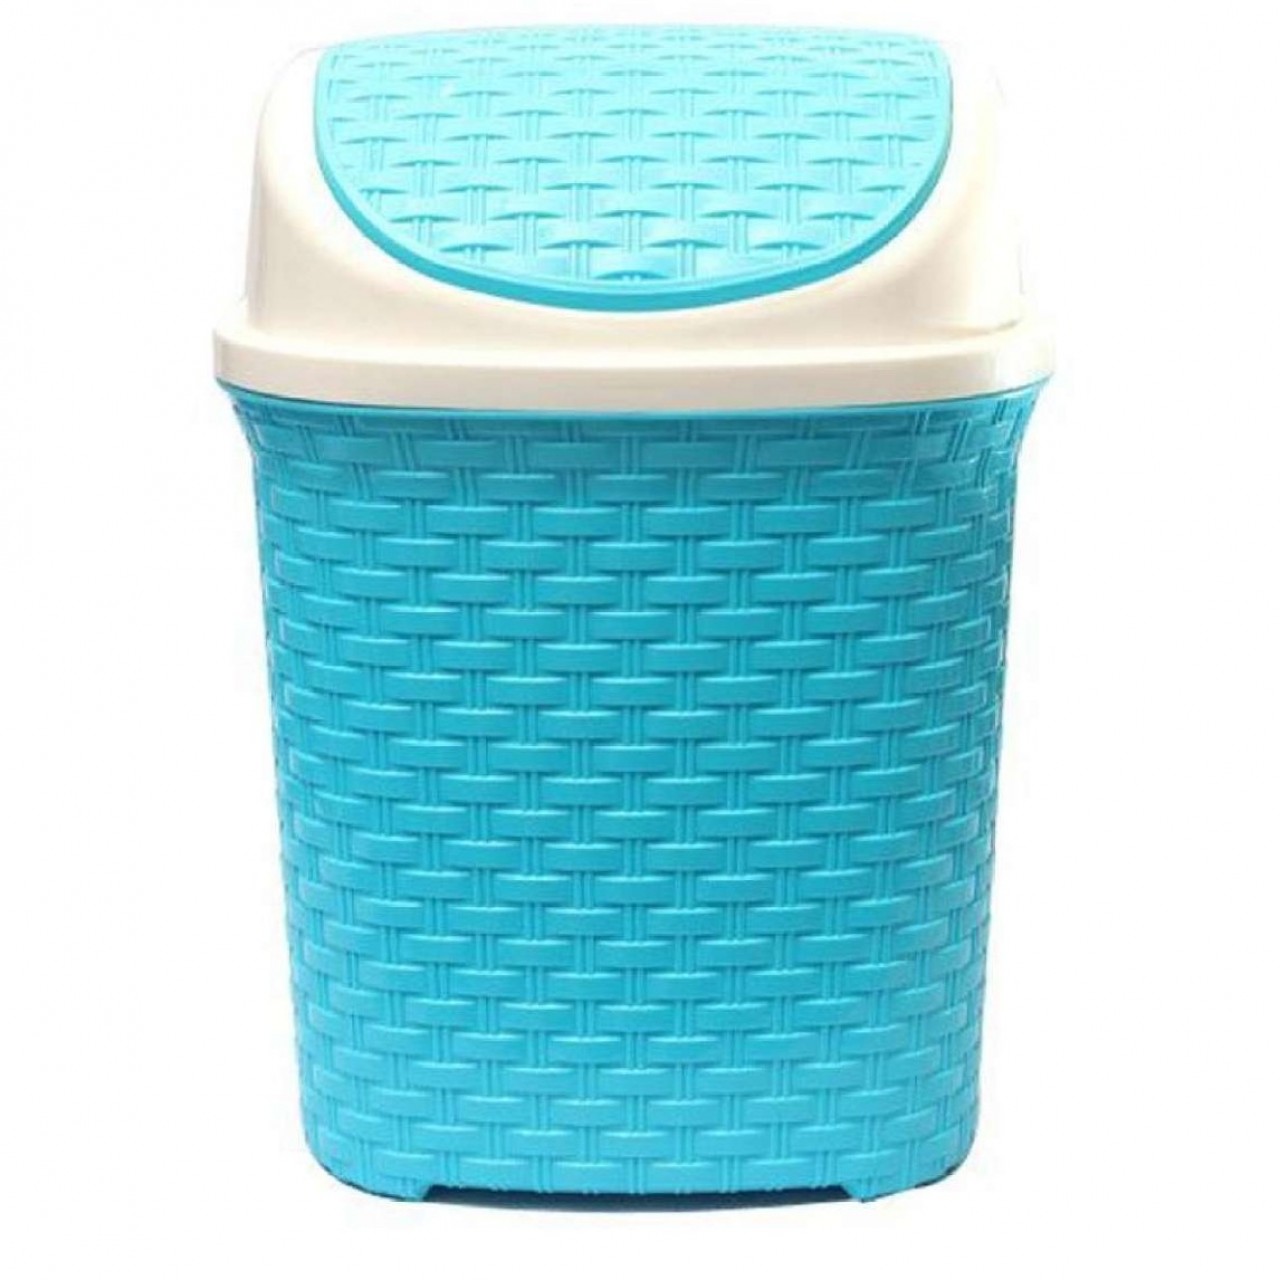 Dustbin With Cover Sky Blue